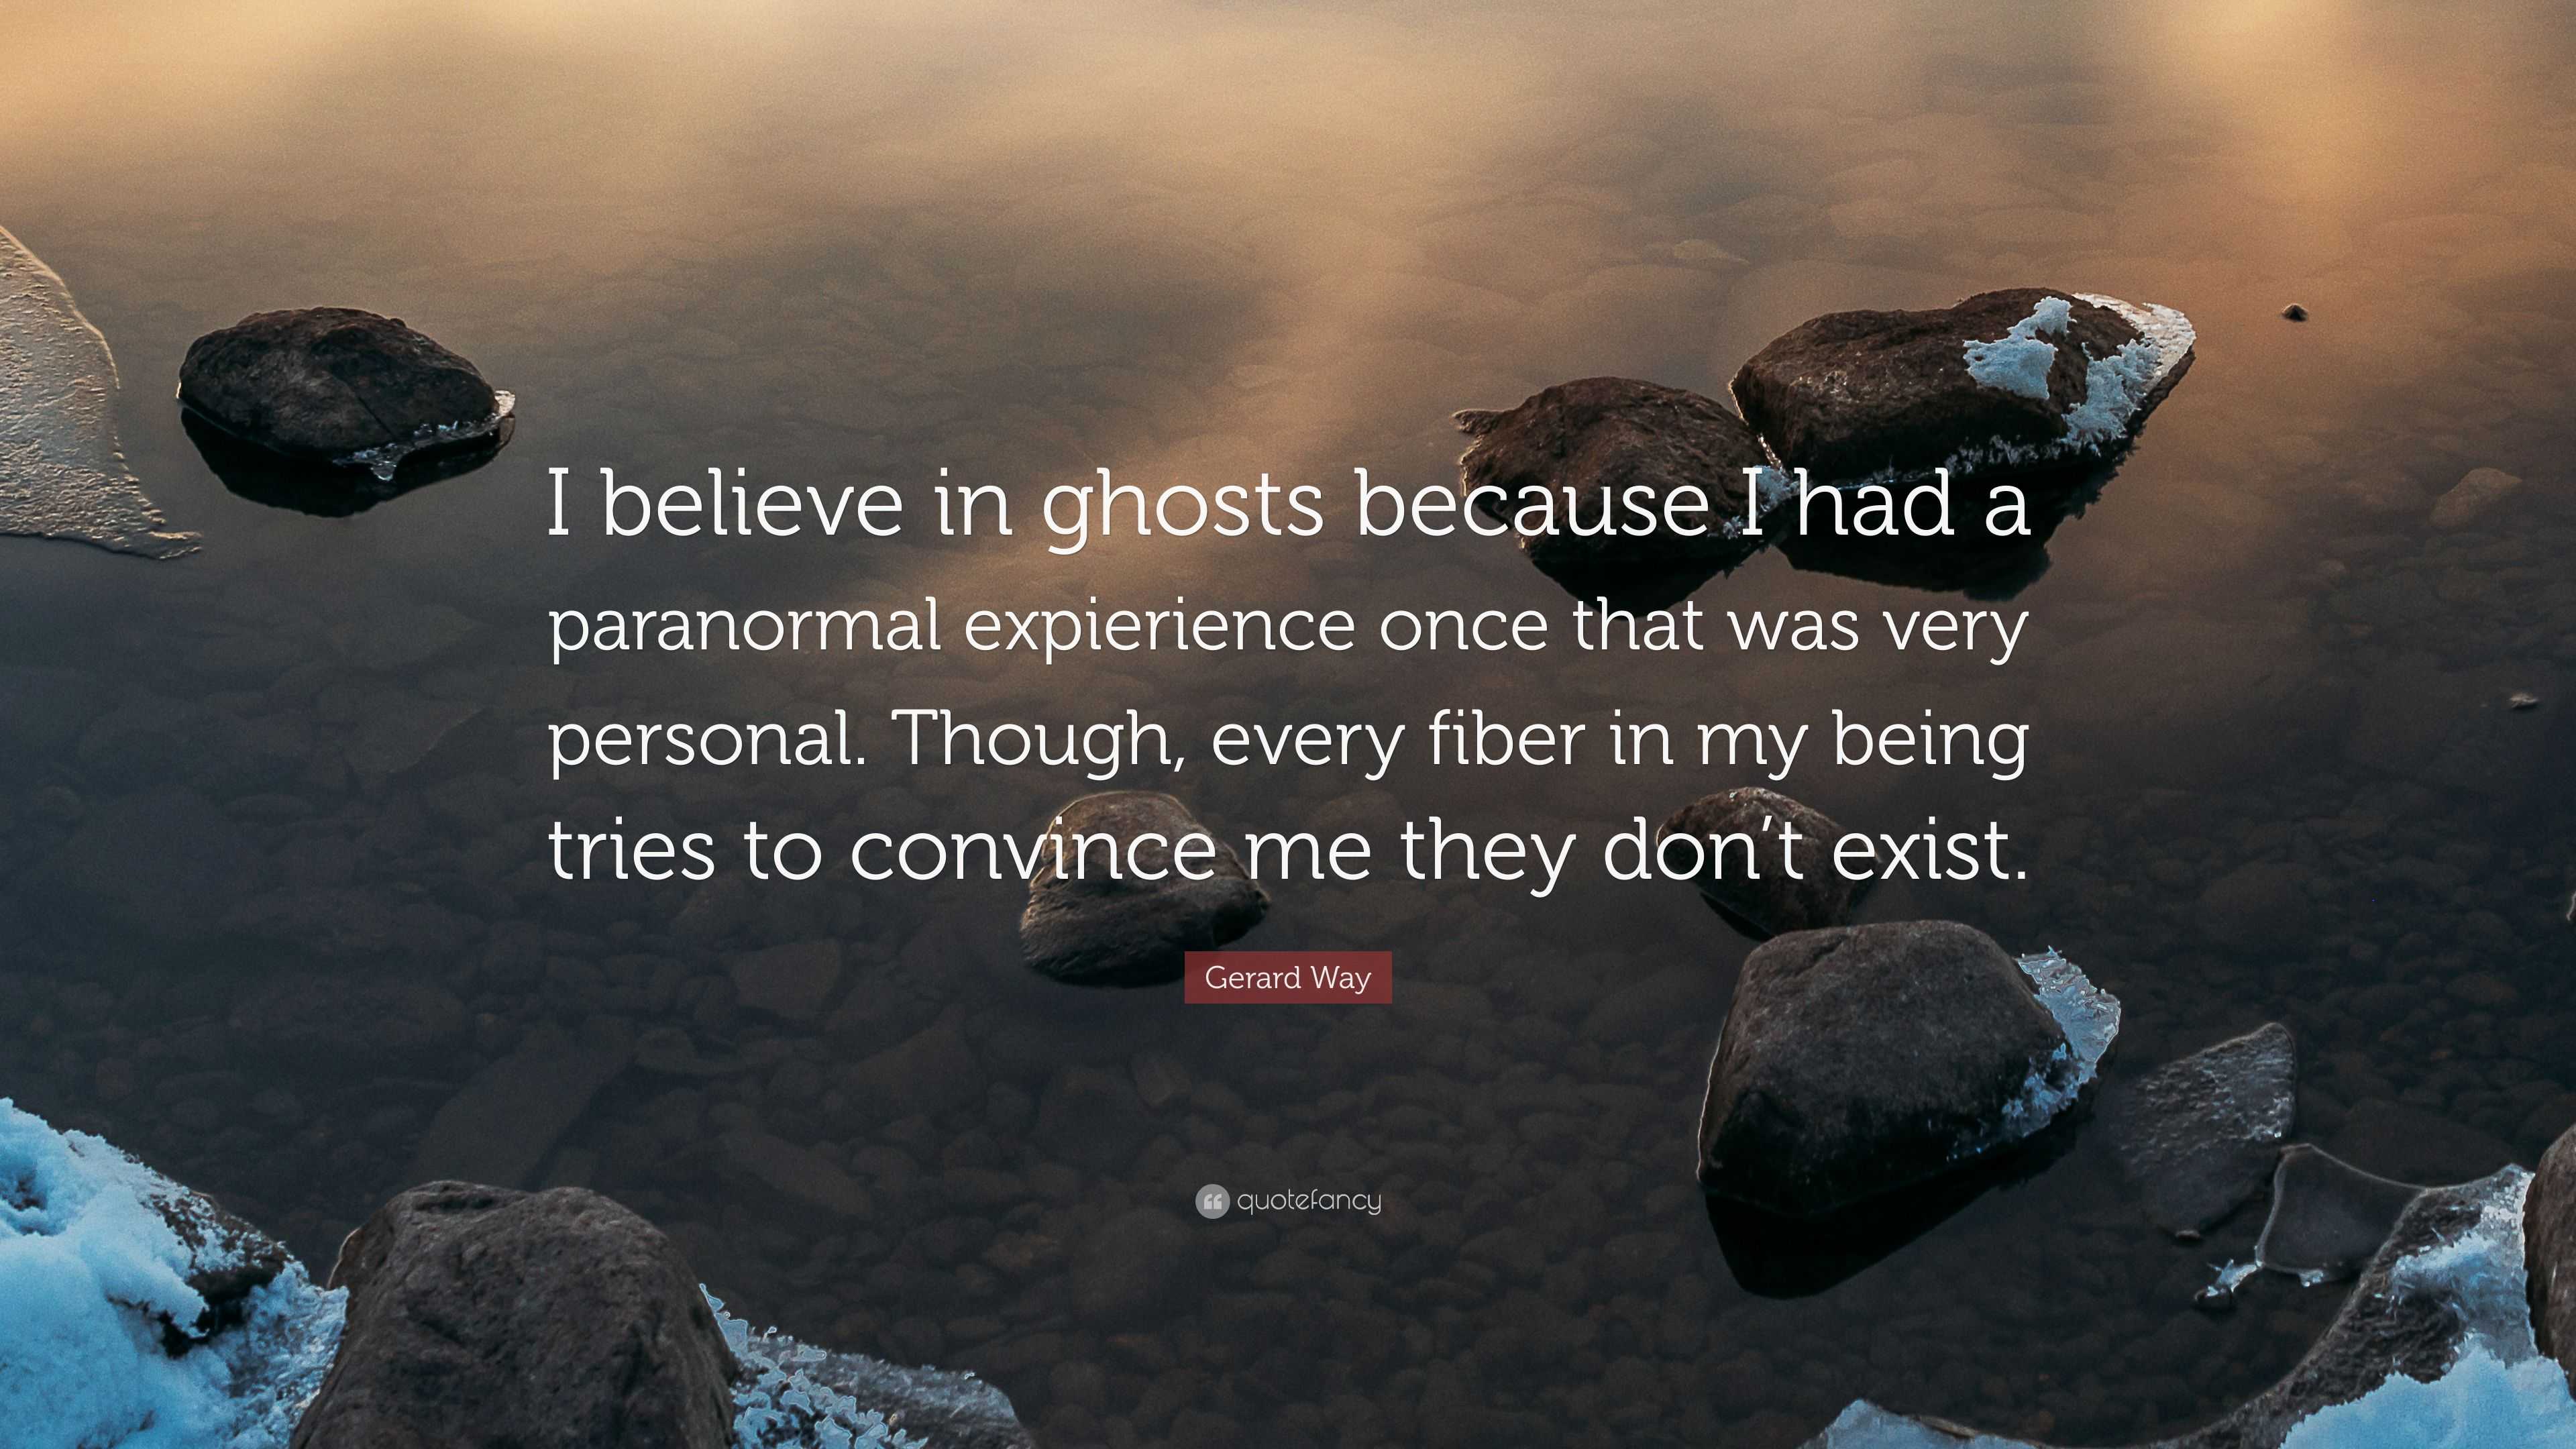 Gerard Way Quote: “I believe in ghosts because I had a paranormal ...